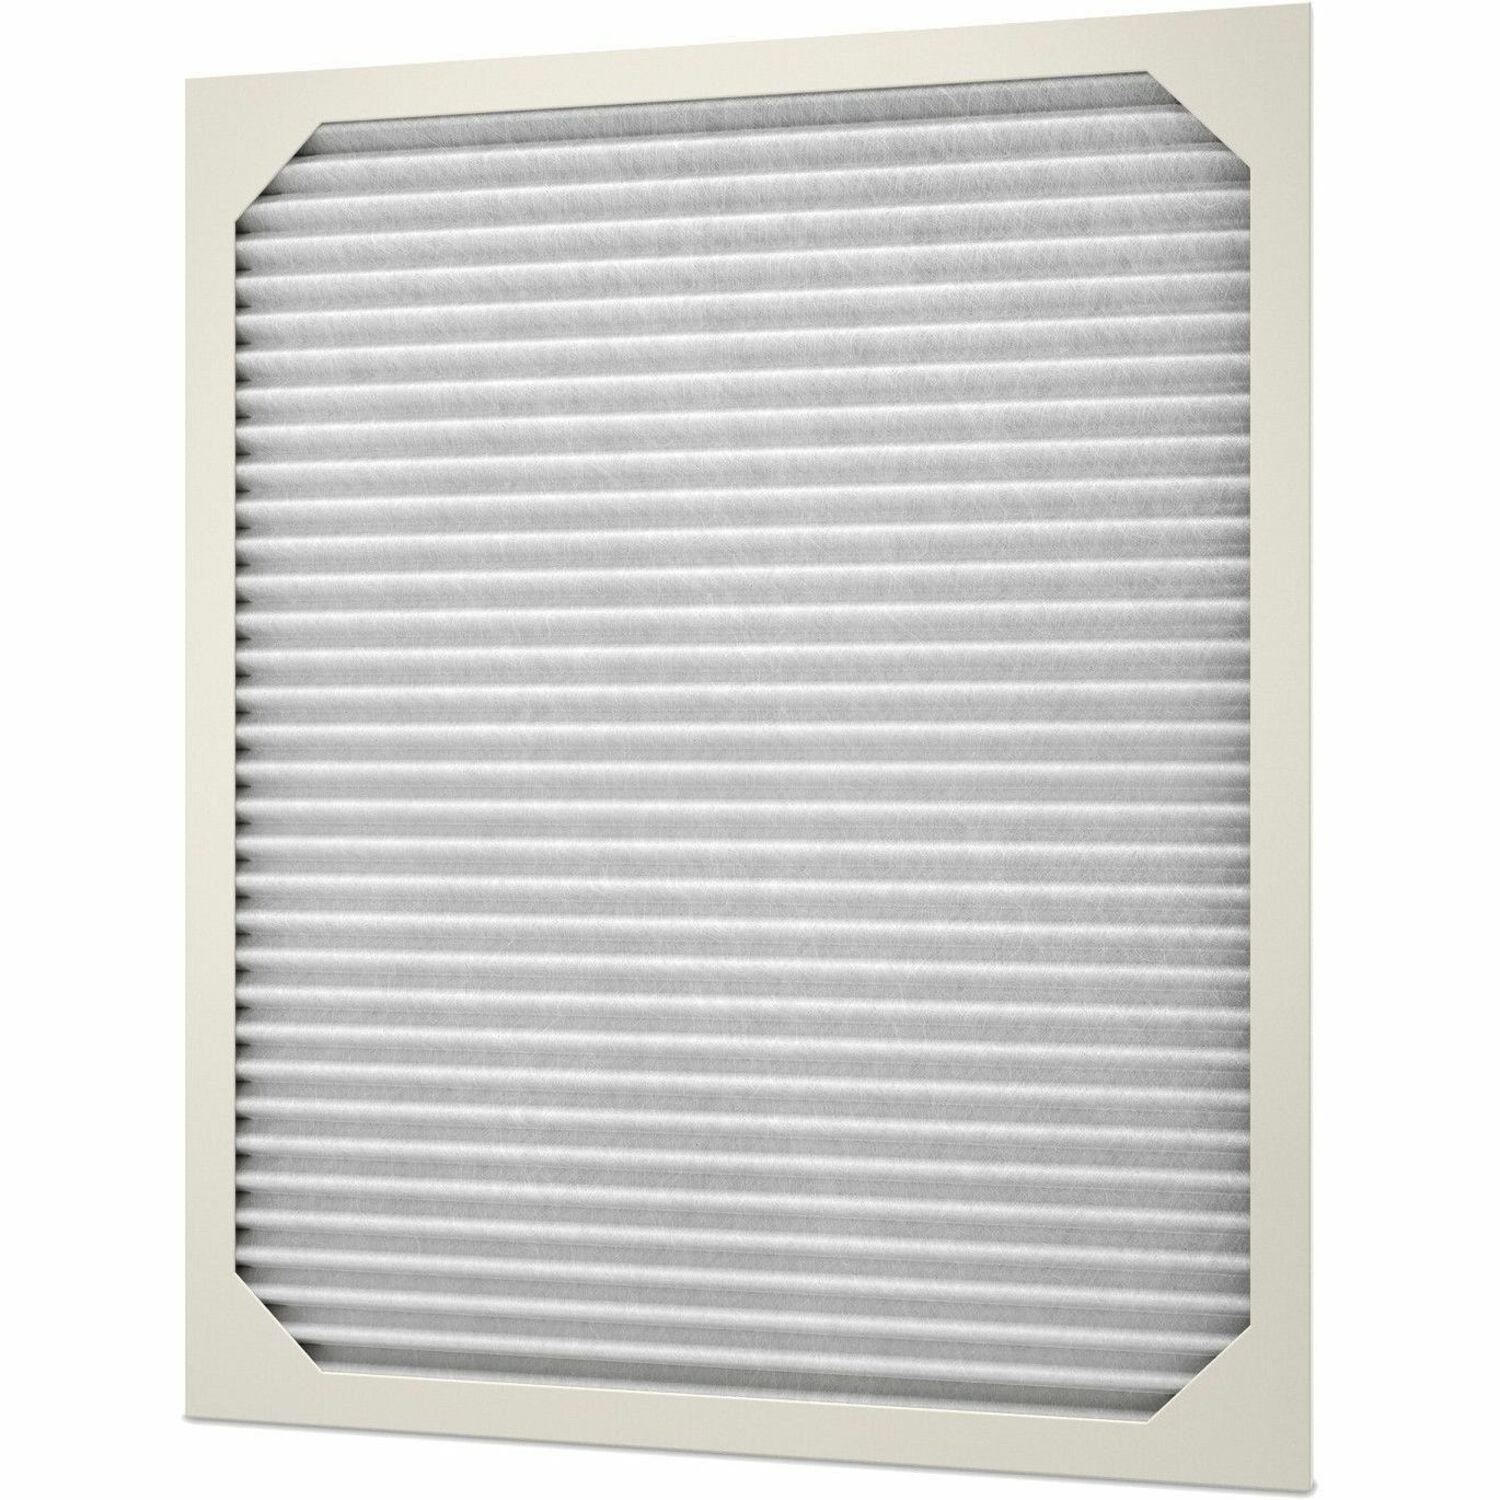 APC by Schneider Electric Galaxy VS Air Filter Kit for 521mm wide UPS